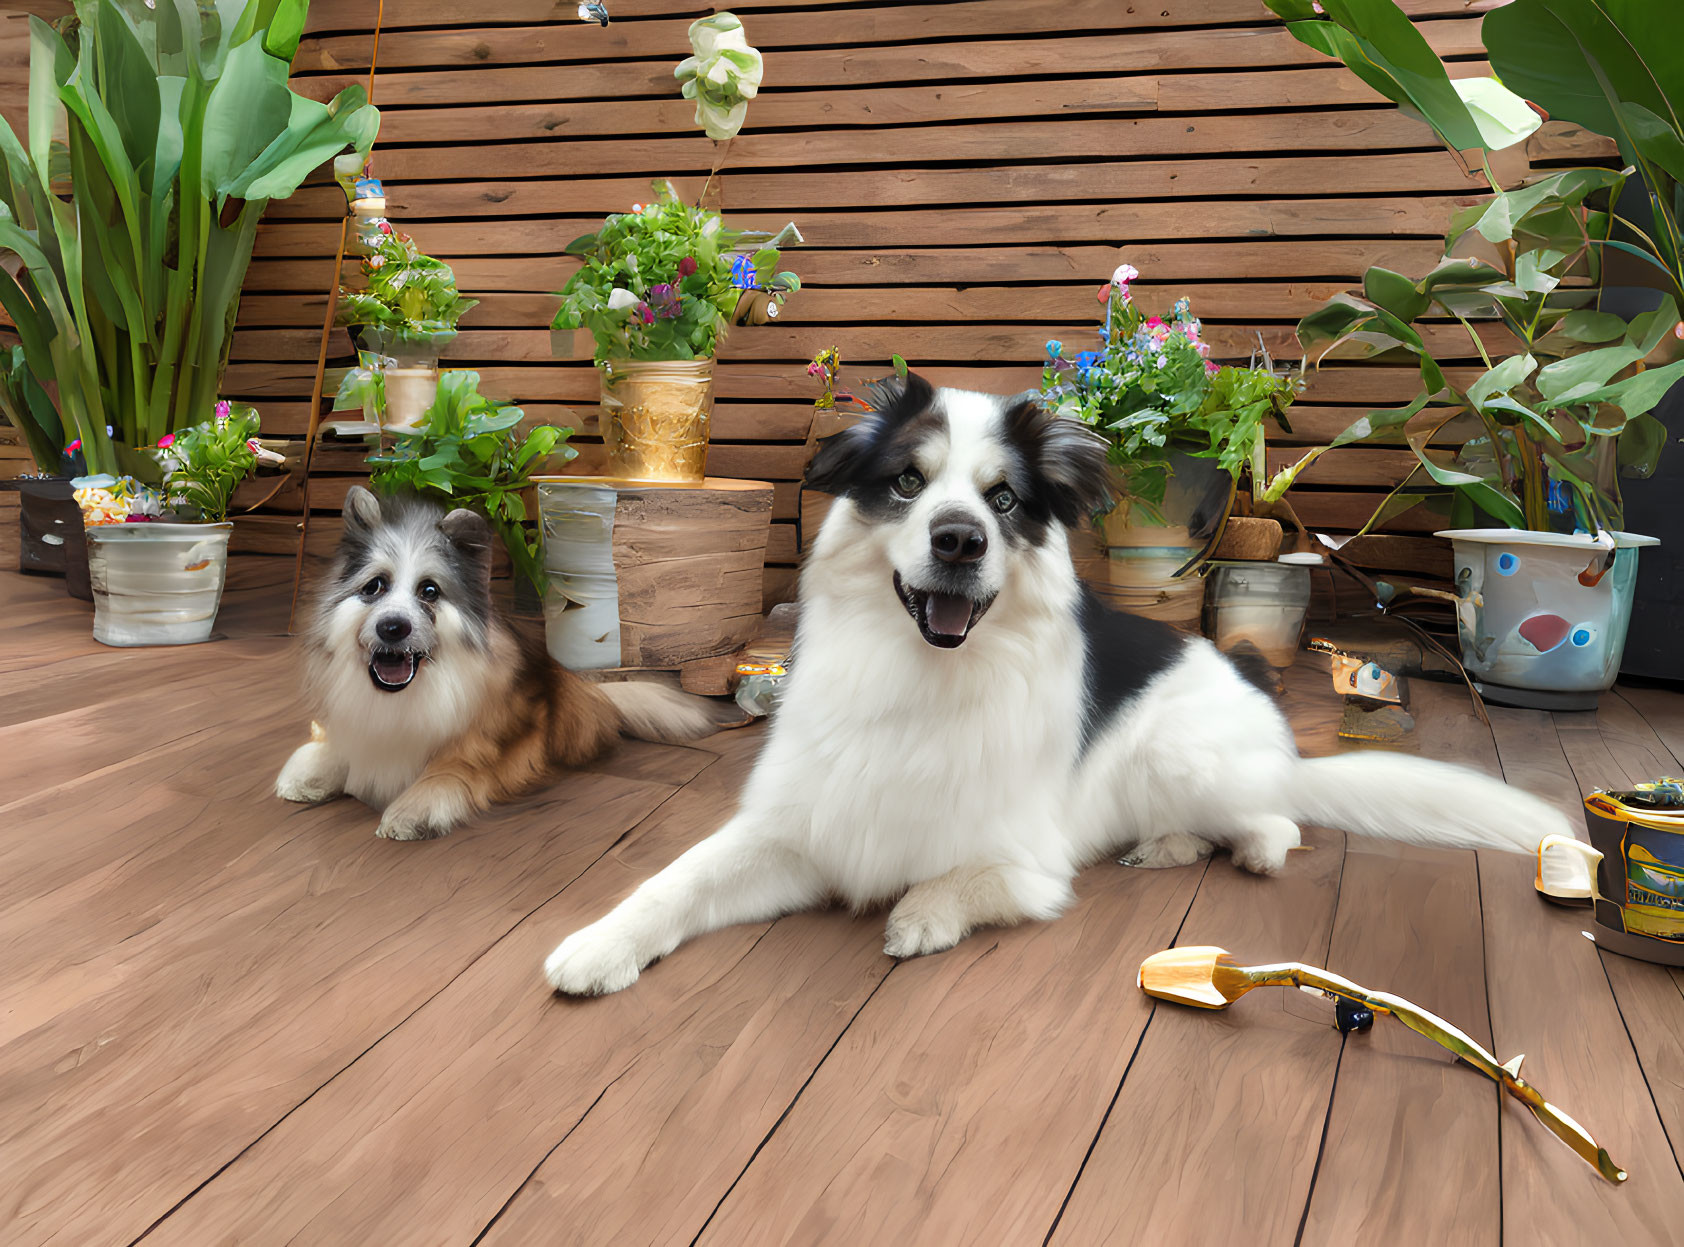 Fluffy dogs on wooden deck with plants & gardening supplies